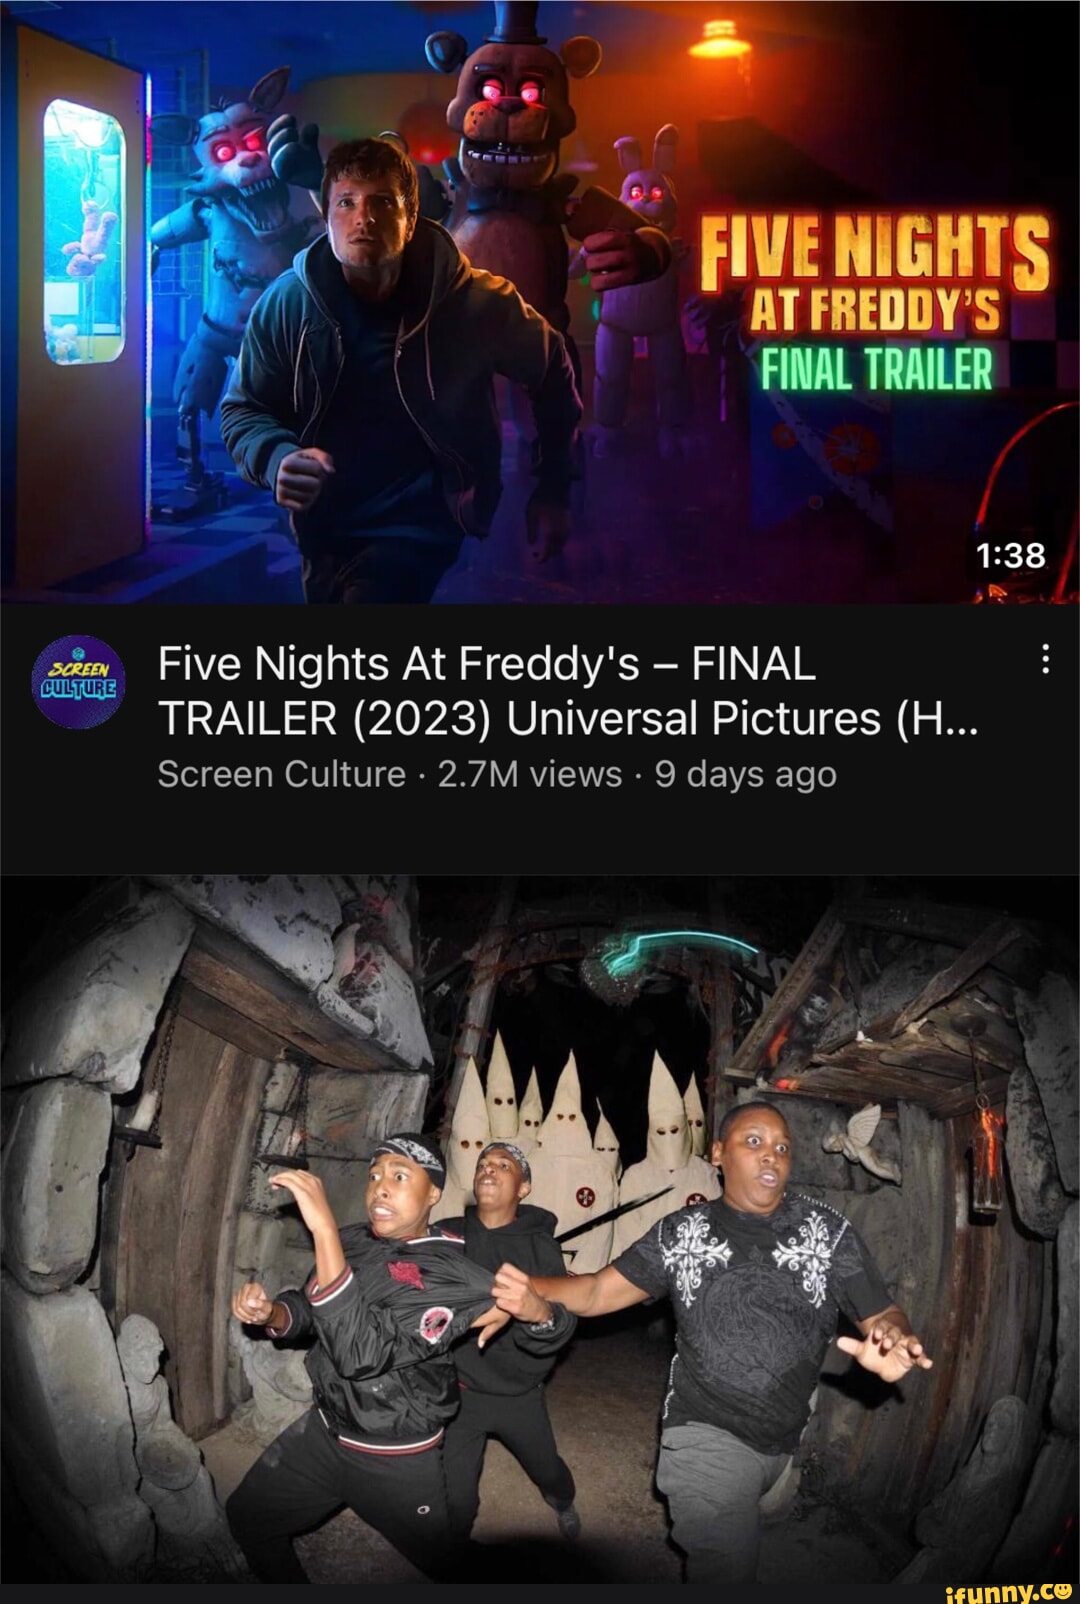 Five Nights At Freddy's (2023) - FINAL TRAILER